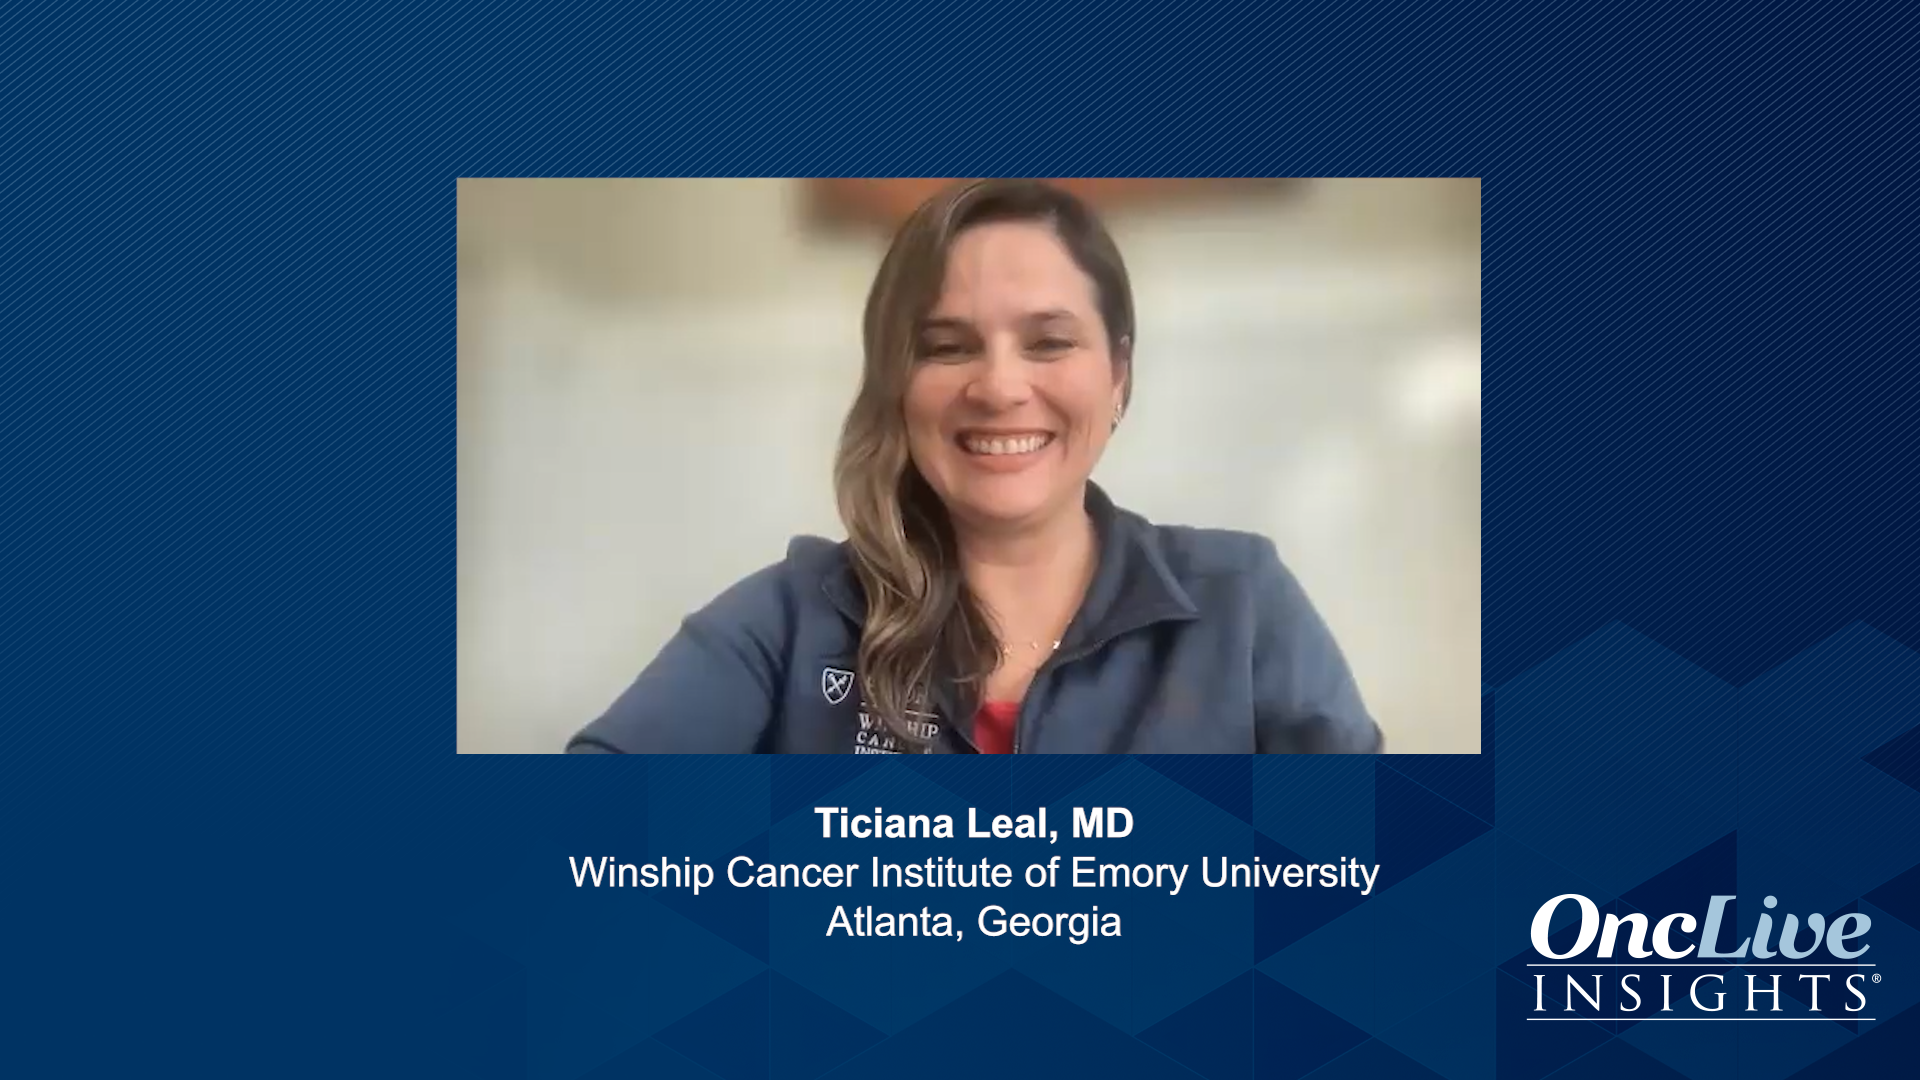 Ticiana Leal, MD, an expert on lung cancer